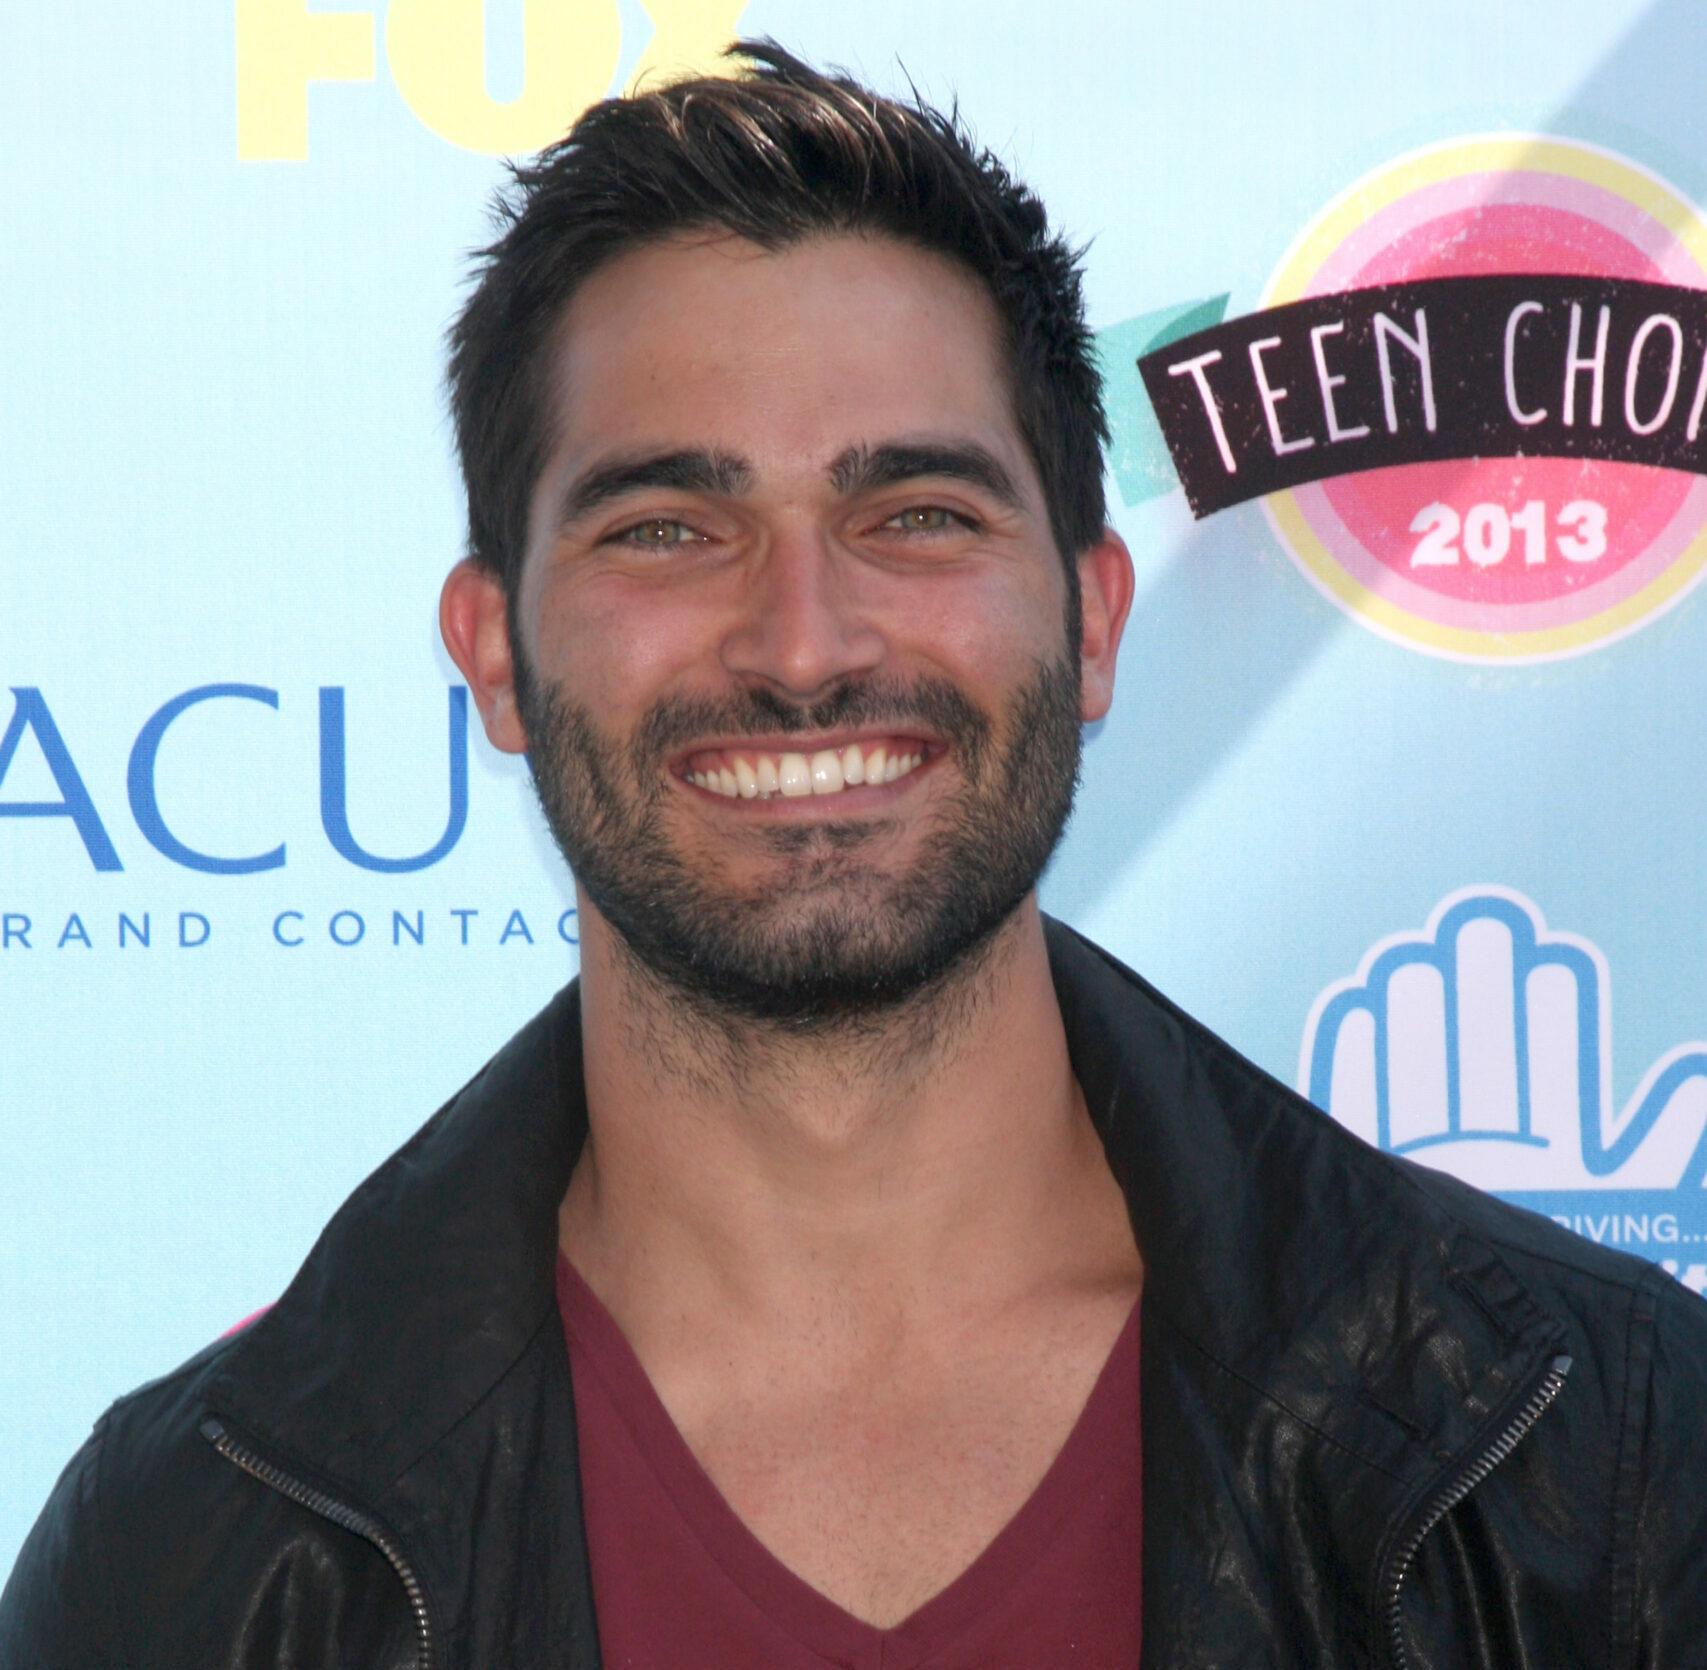 Tyler Hoechlin at the 2013 Teen Choice Awards at the Gibson Ampitheater Universal on August 11, 2013 in Los Angeles, CA